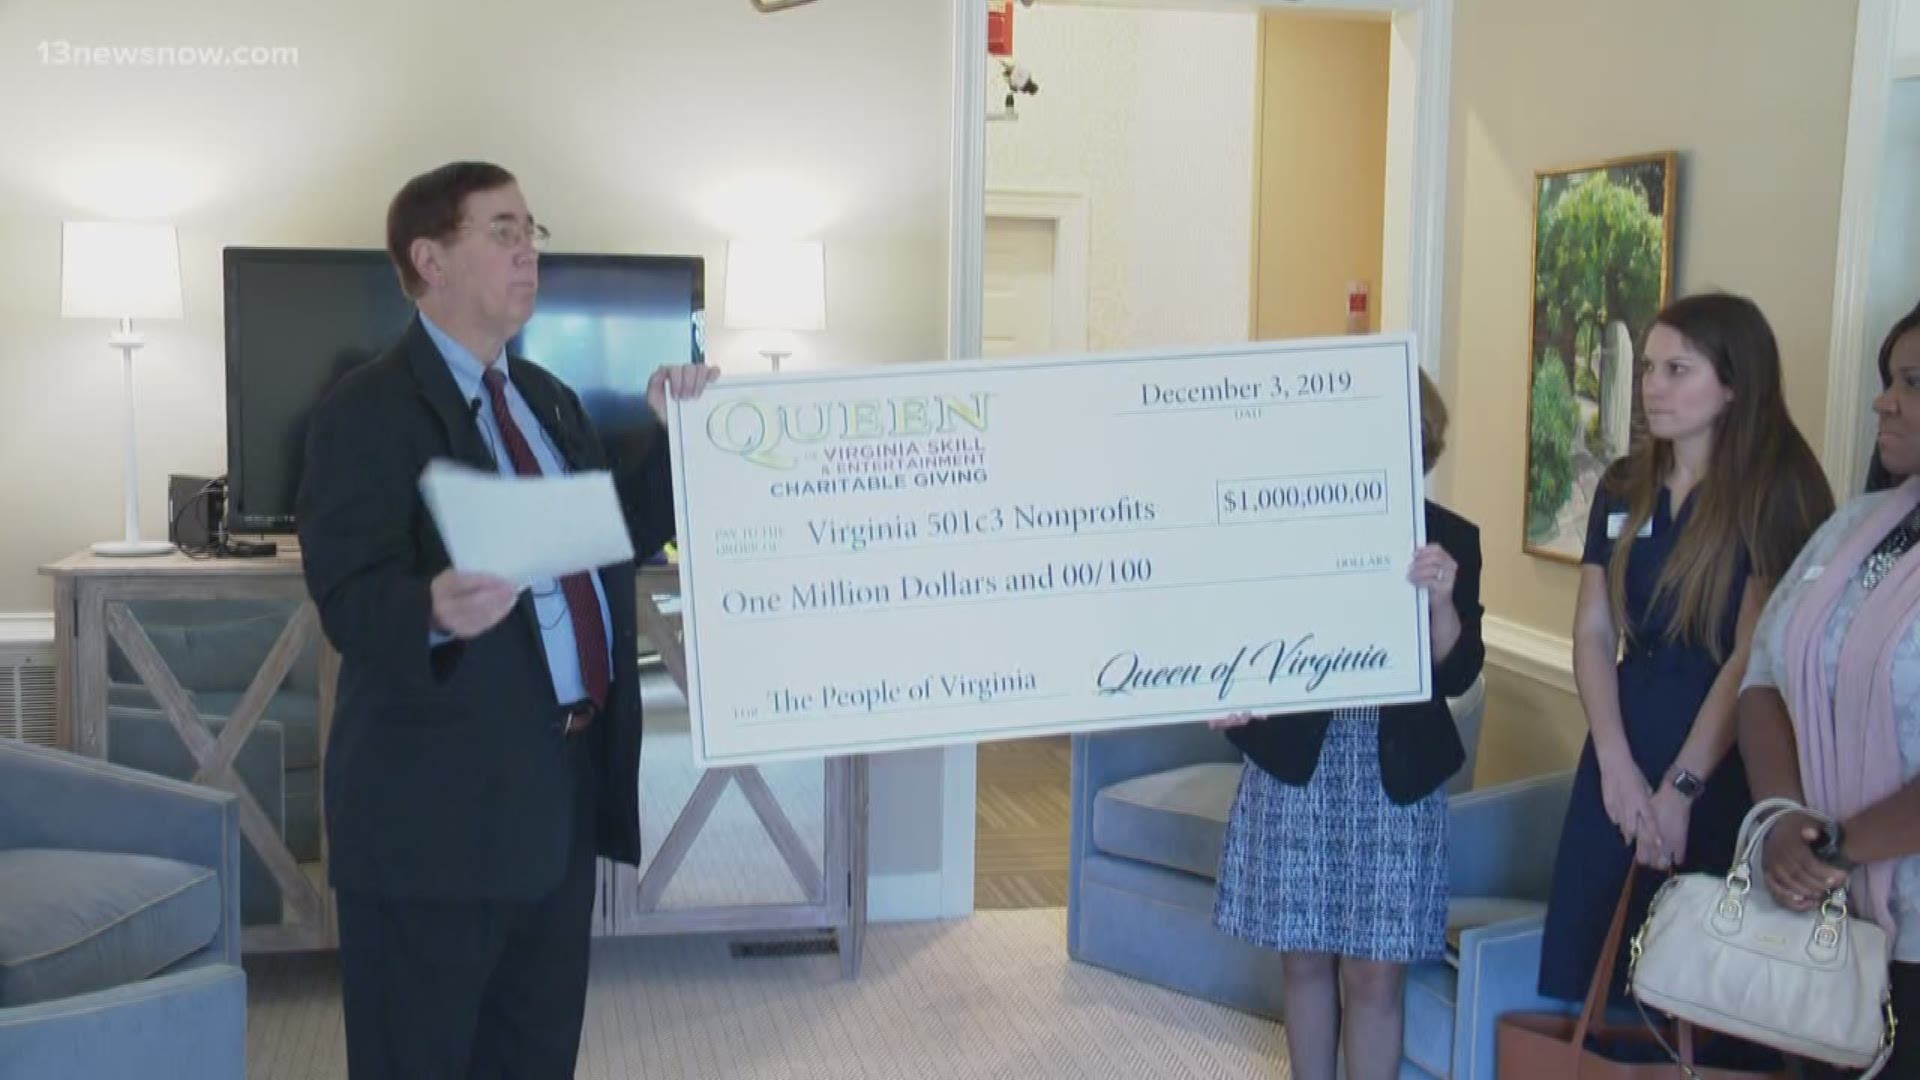 Queen of Virginia Skill and Entertainment organized the event. They celebrated the milestone of donating more than $1,000,000 to local non-profits.